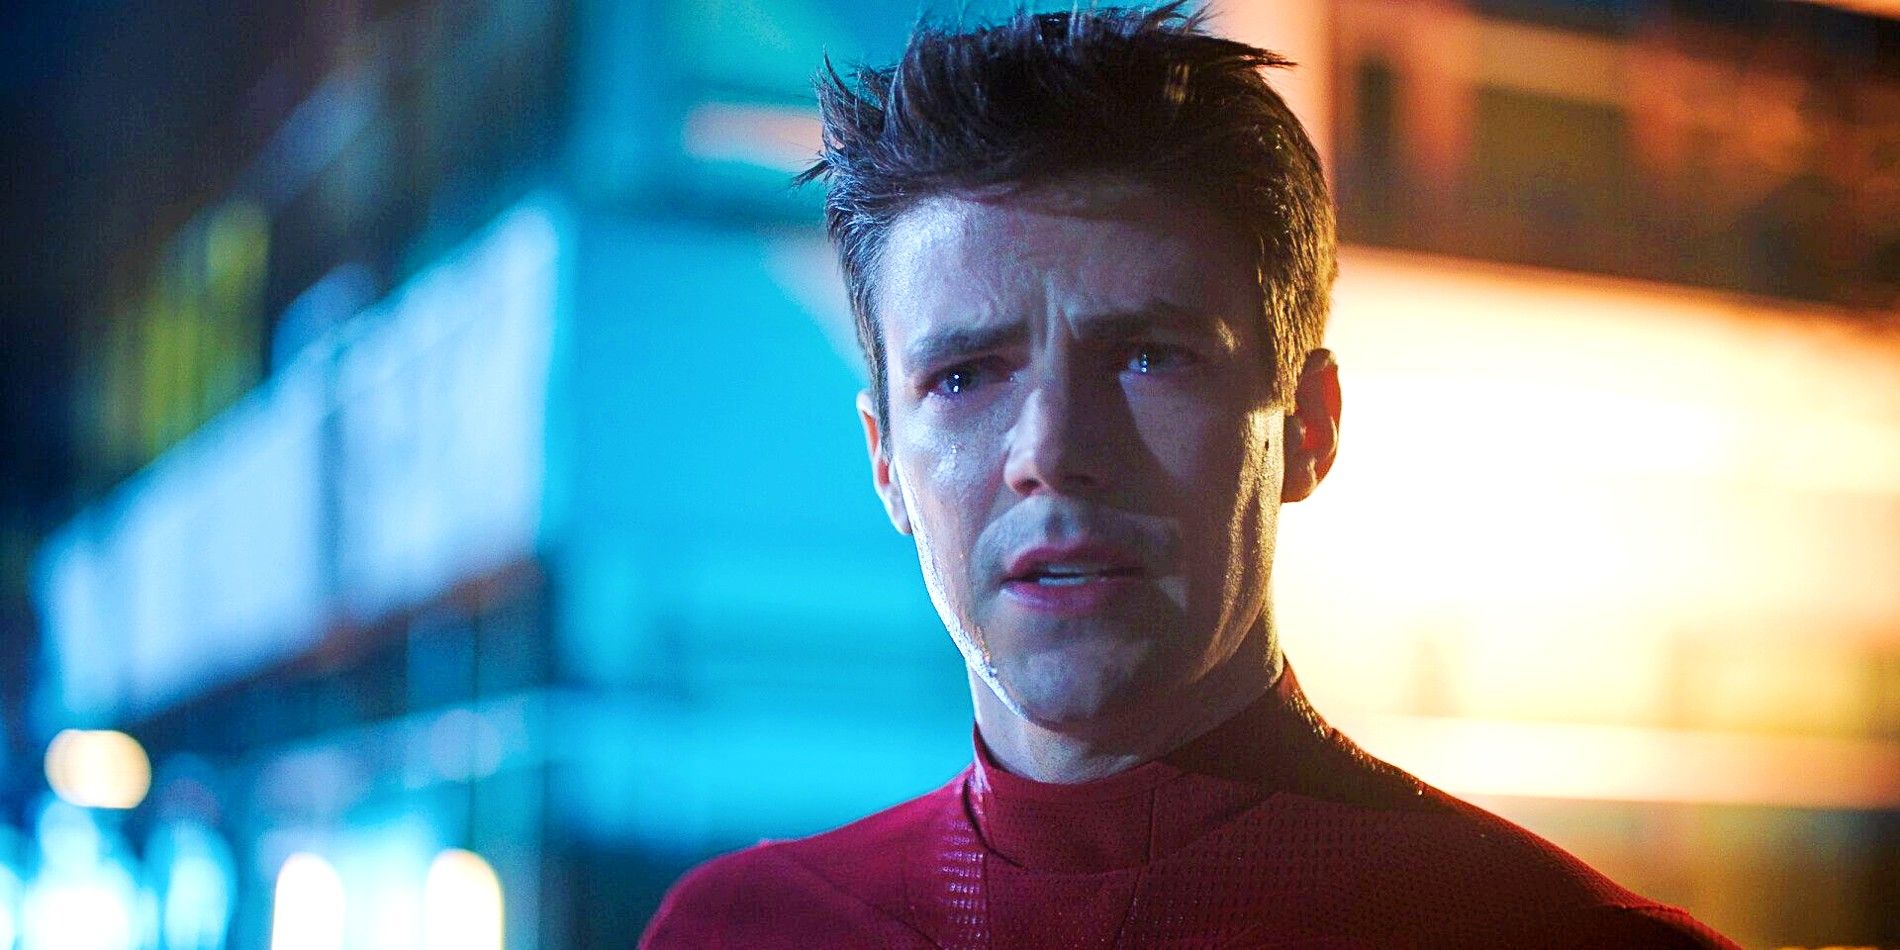 Grant Gustin as Barry Allen looking sad in The Flash